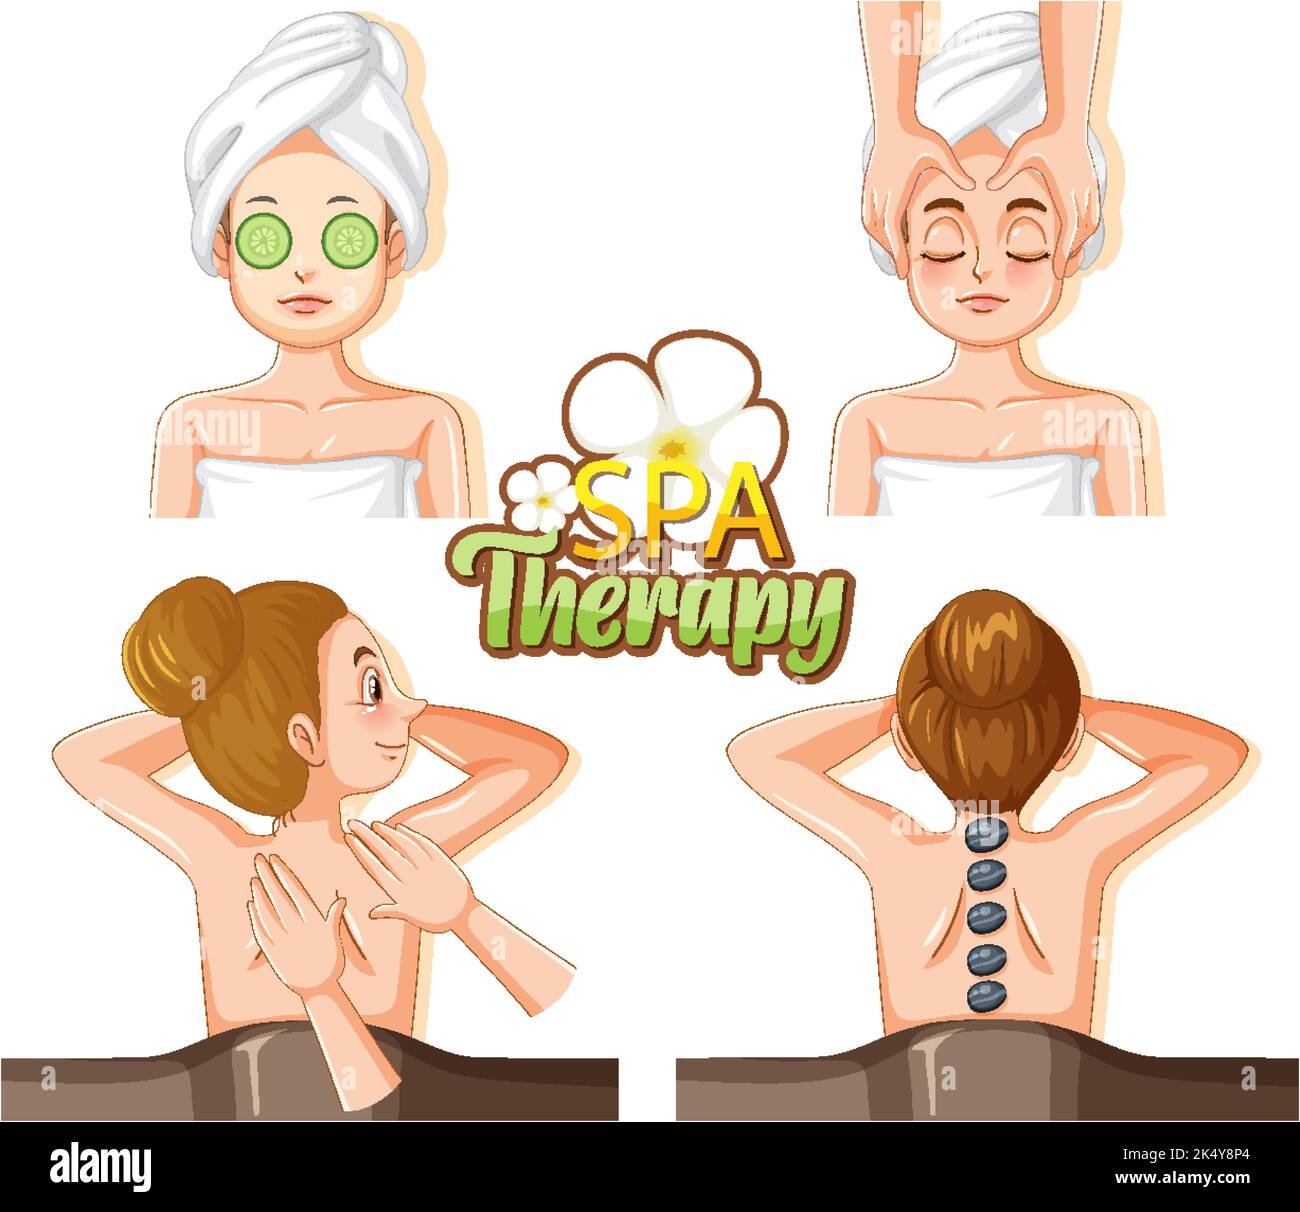 Spa therapy text with women character illustration Stock Vector